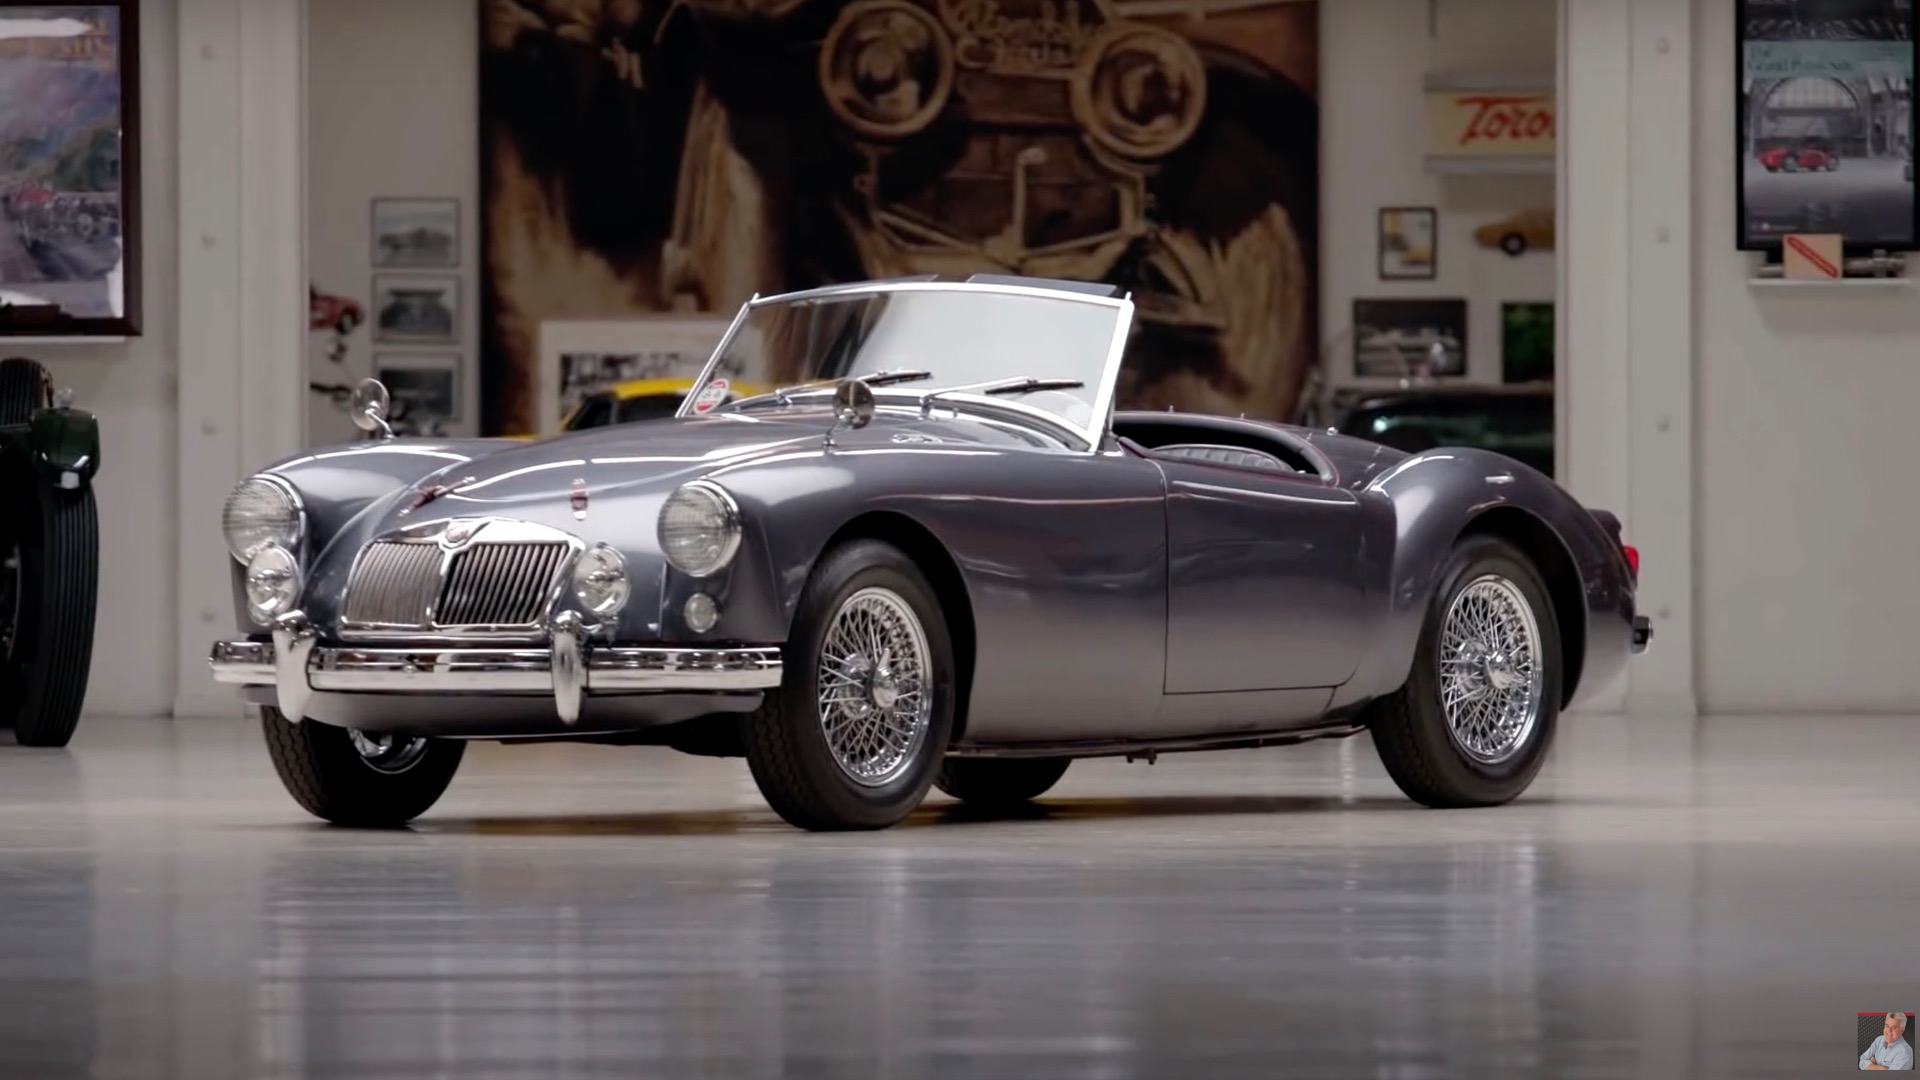 Jay Leno meets a young car enthusiast who restored a 1958 MG A Auto Recent